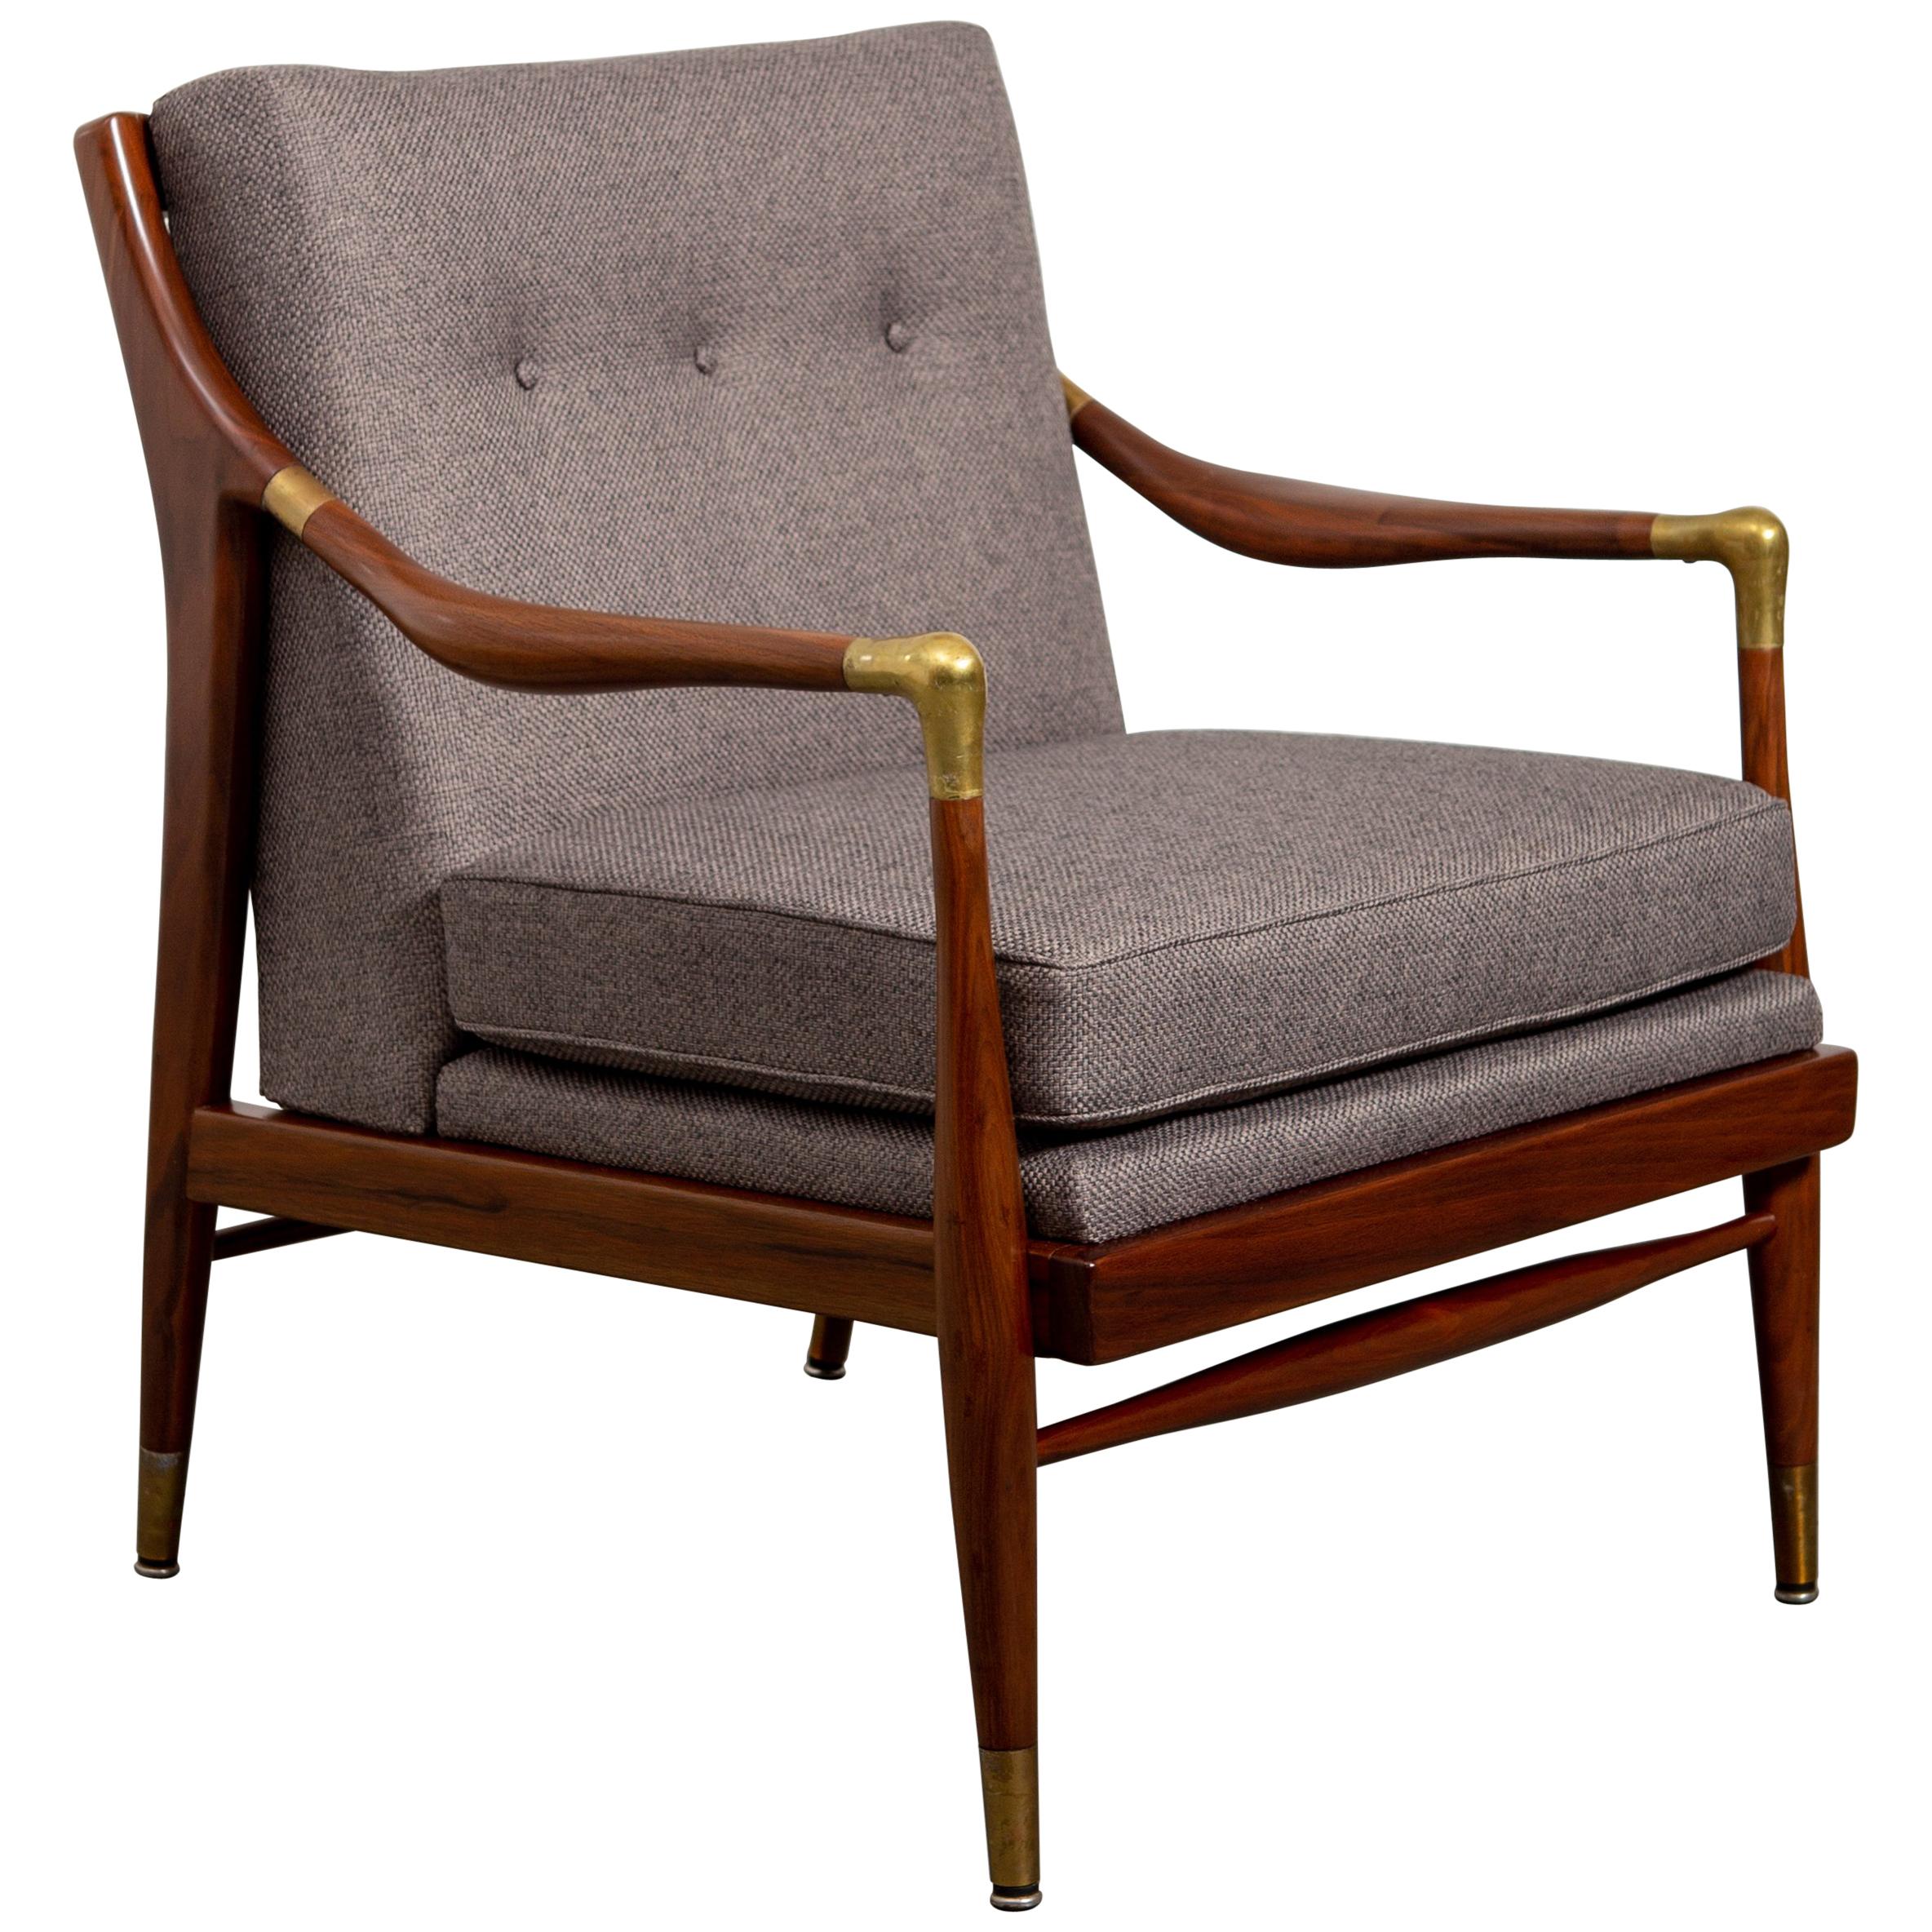 Restored American Midcentury Armchair with Brass Accents